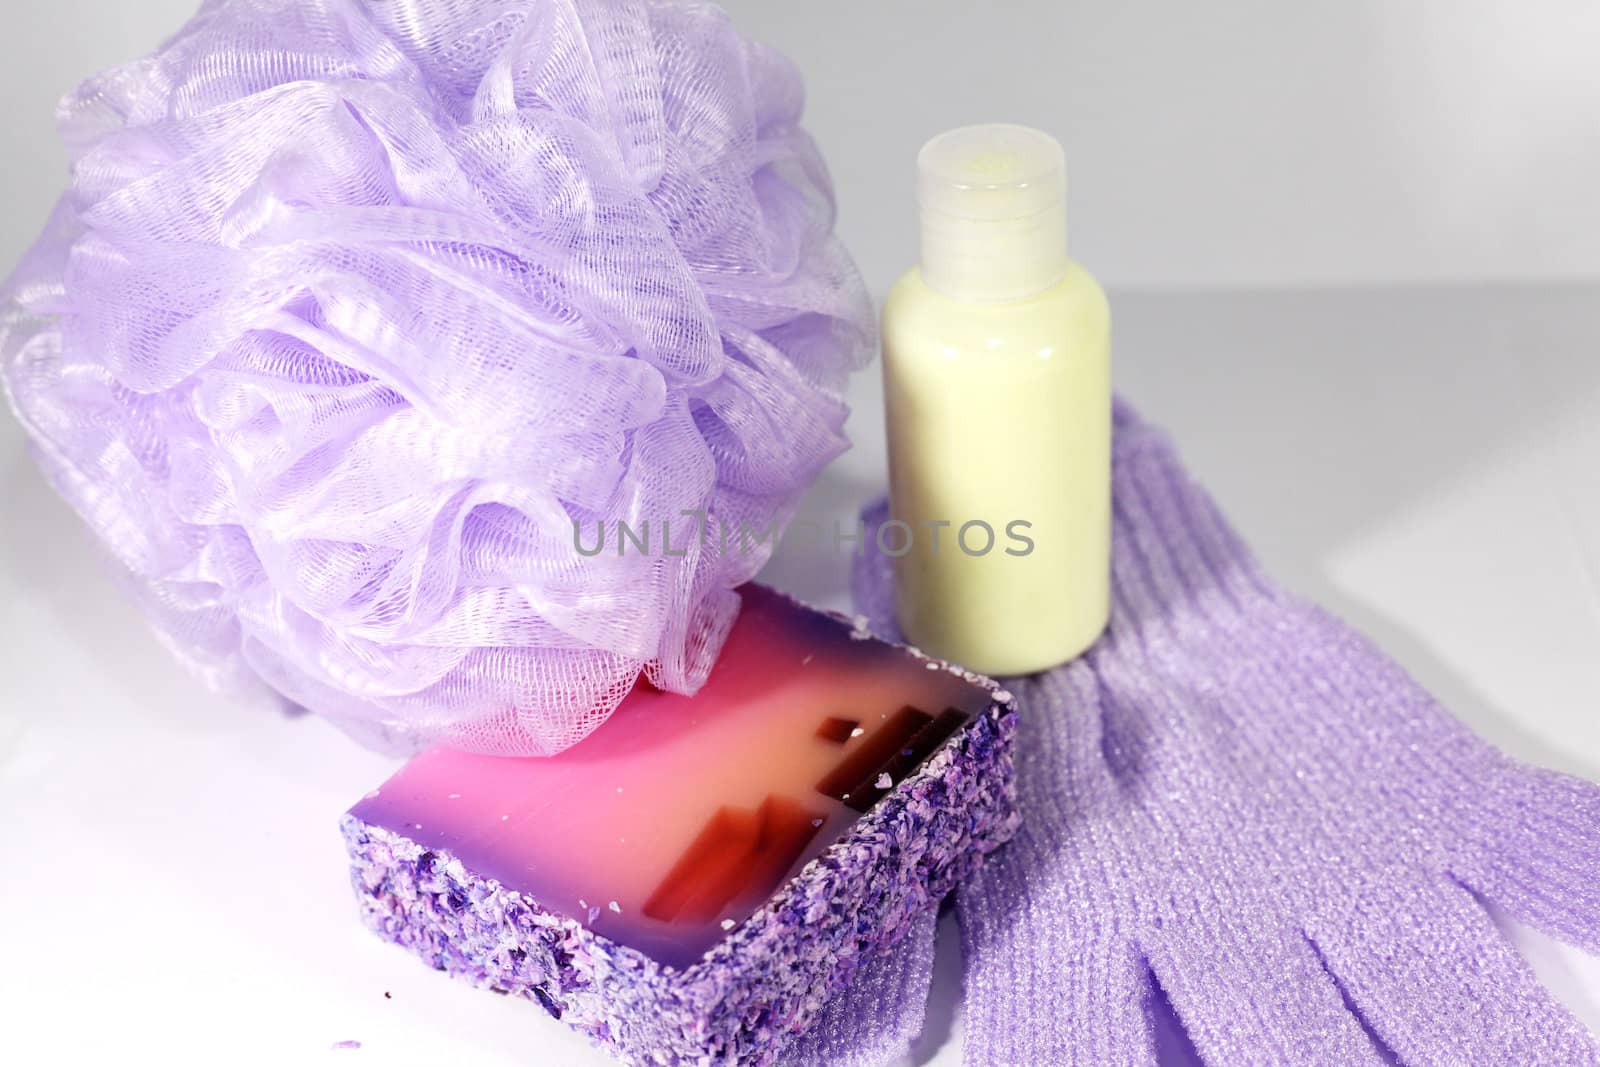 composition of sponge to wash,colored soaps and shampoo  bottle  by valentinacarpin